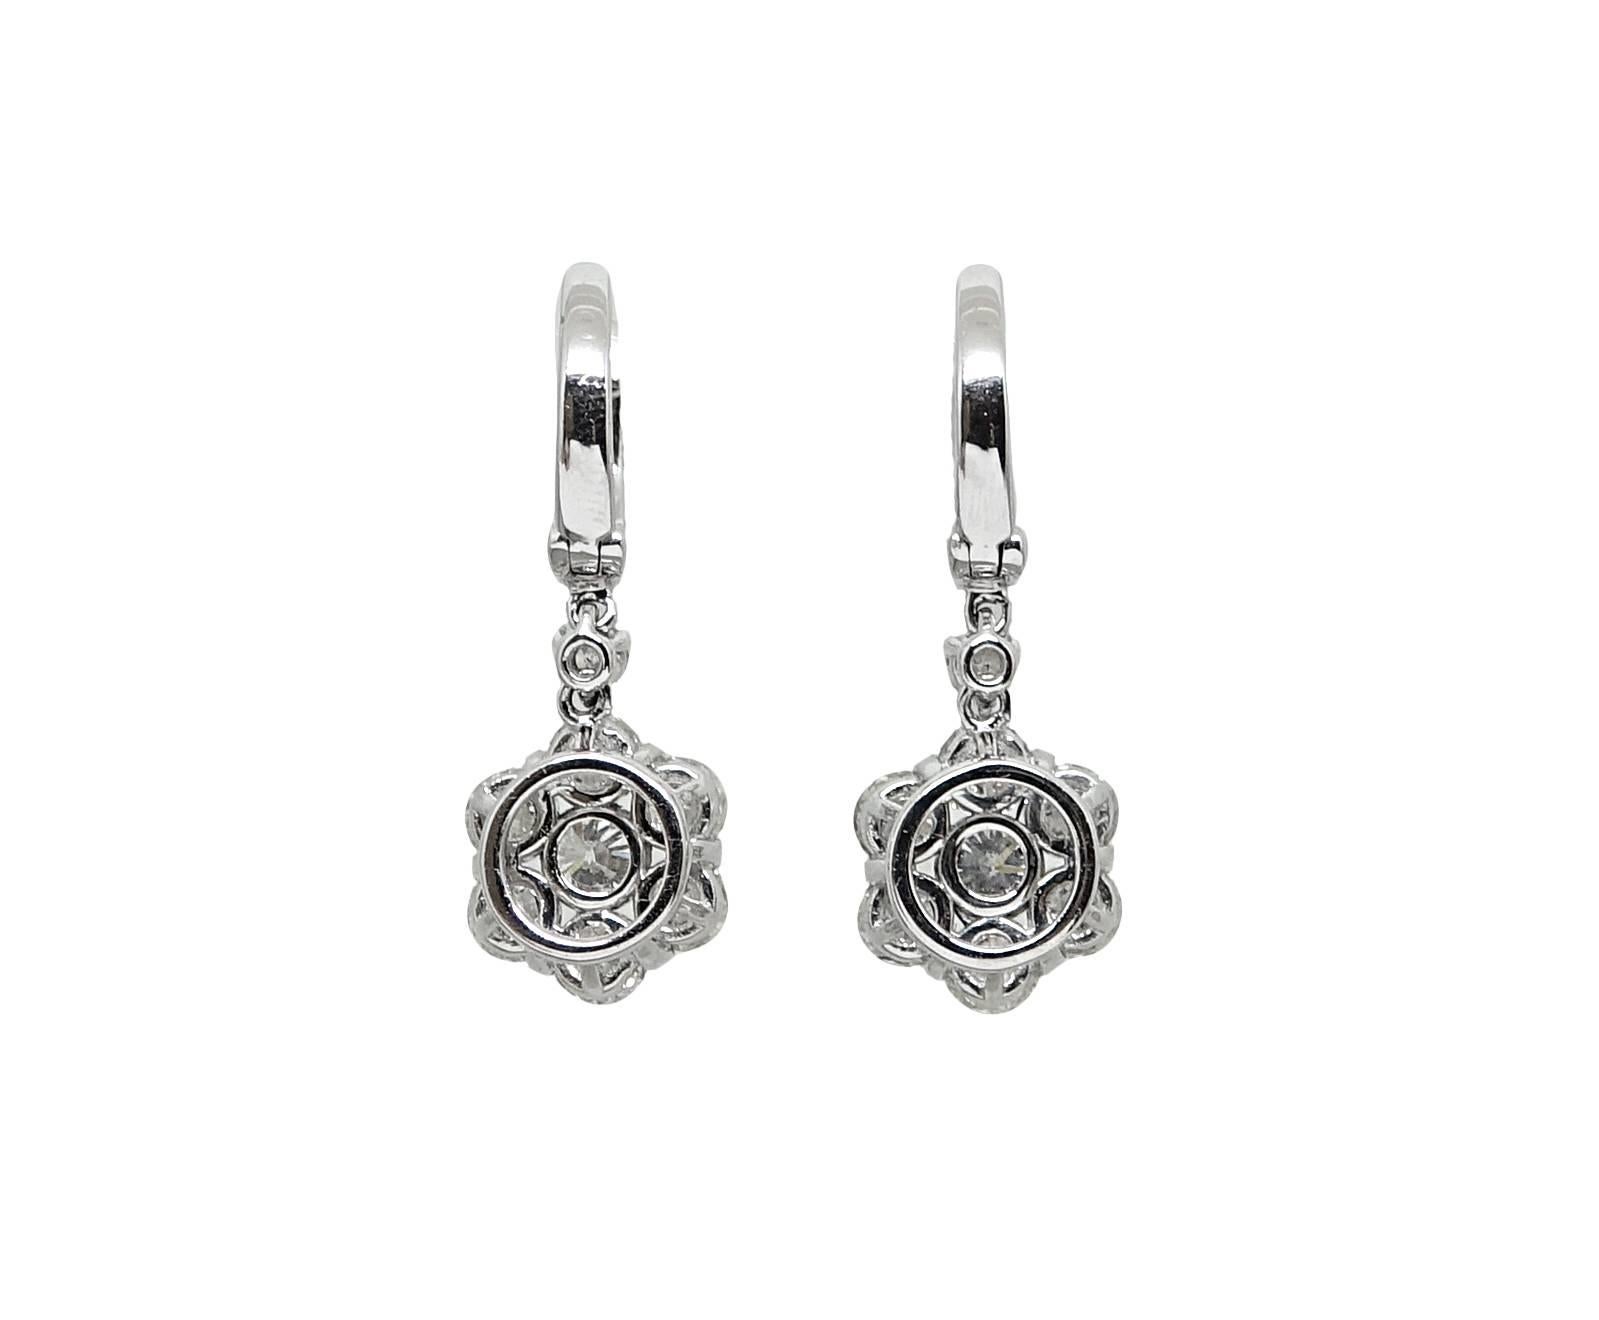 These 18K White Gold Dangling Earrings With Diamonds Weighing A Total Carat Weight Of 3.43 Carats. These Earrings Measure An Inch In Length.